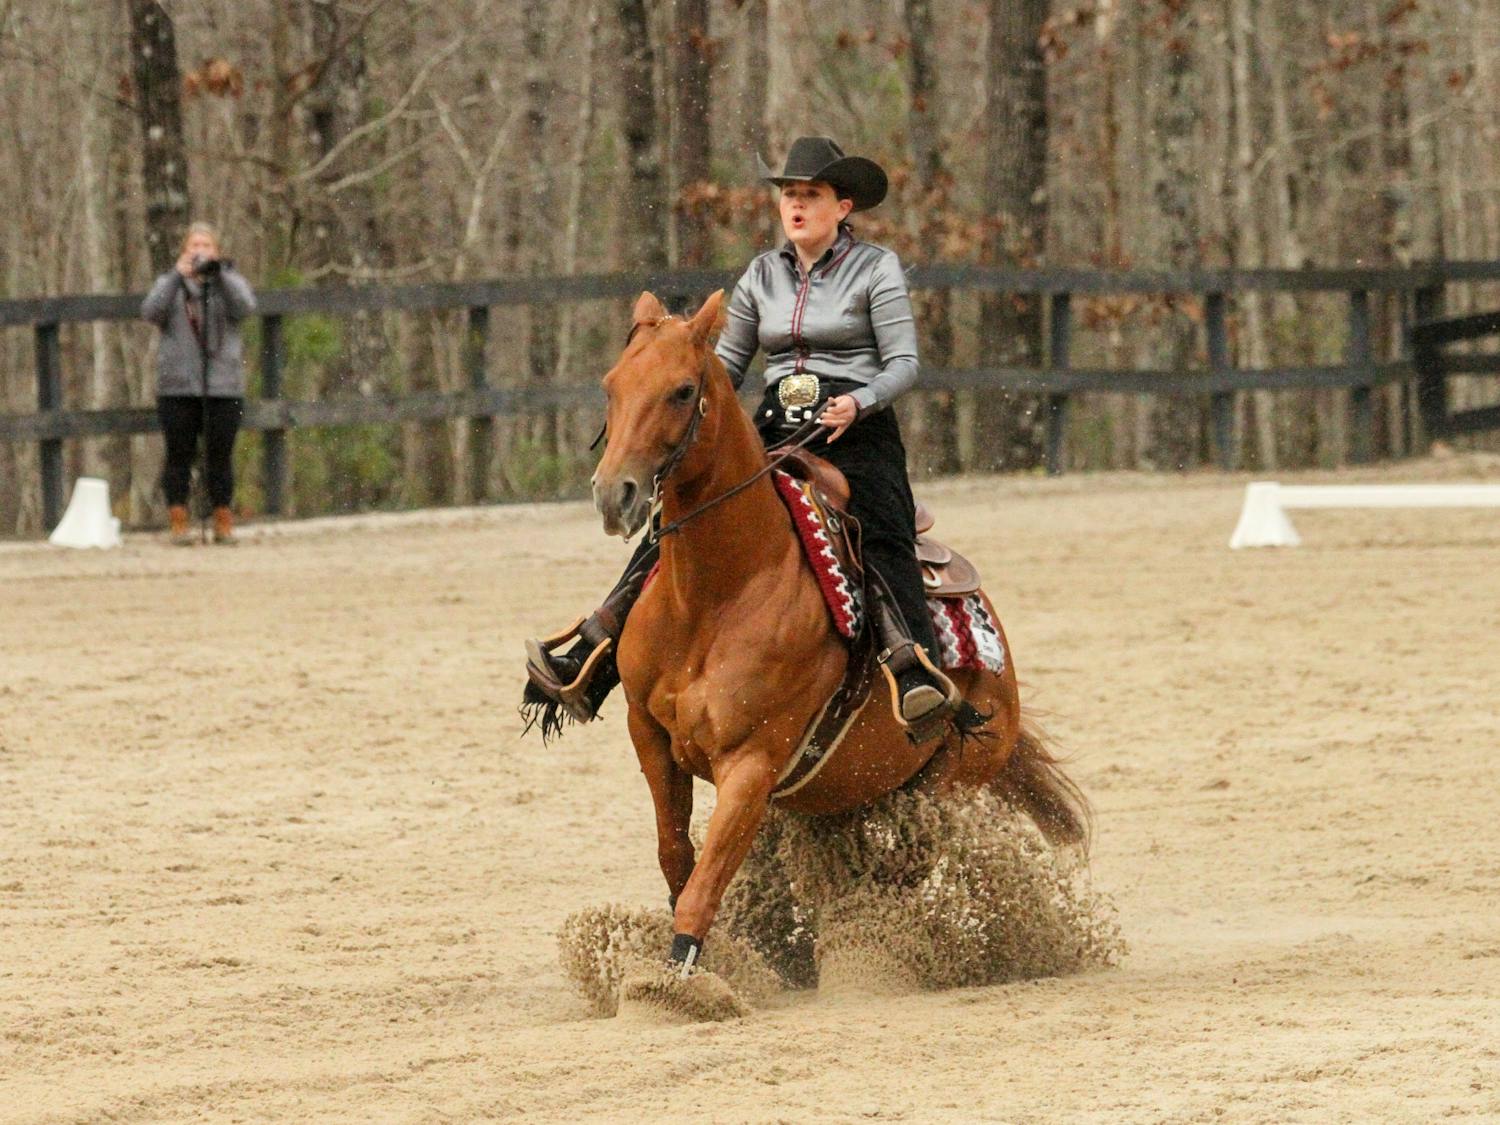 Senior Mary Margaret Coats, mounted on Chexie, competes in the reigning category during the meet against Texas A&amp;M at One Wood Farm on Feb. 11, 2023. One of her favorite memories from competing for the University of South Carolina over the past four years was celebrating Senior Day. “It’s really because all the parents come out, (and) everyone is screaming as loud as you possibly can. We’ve had some crazy wins on Senior Day and it really just makes you realize how appreciative we are of everyone on the team,” Coats said.